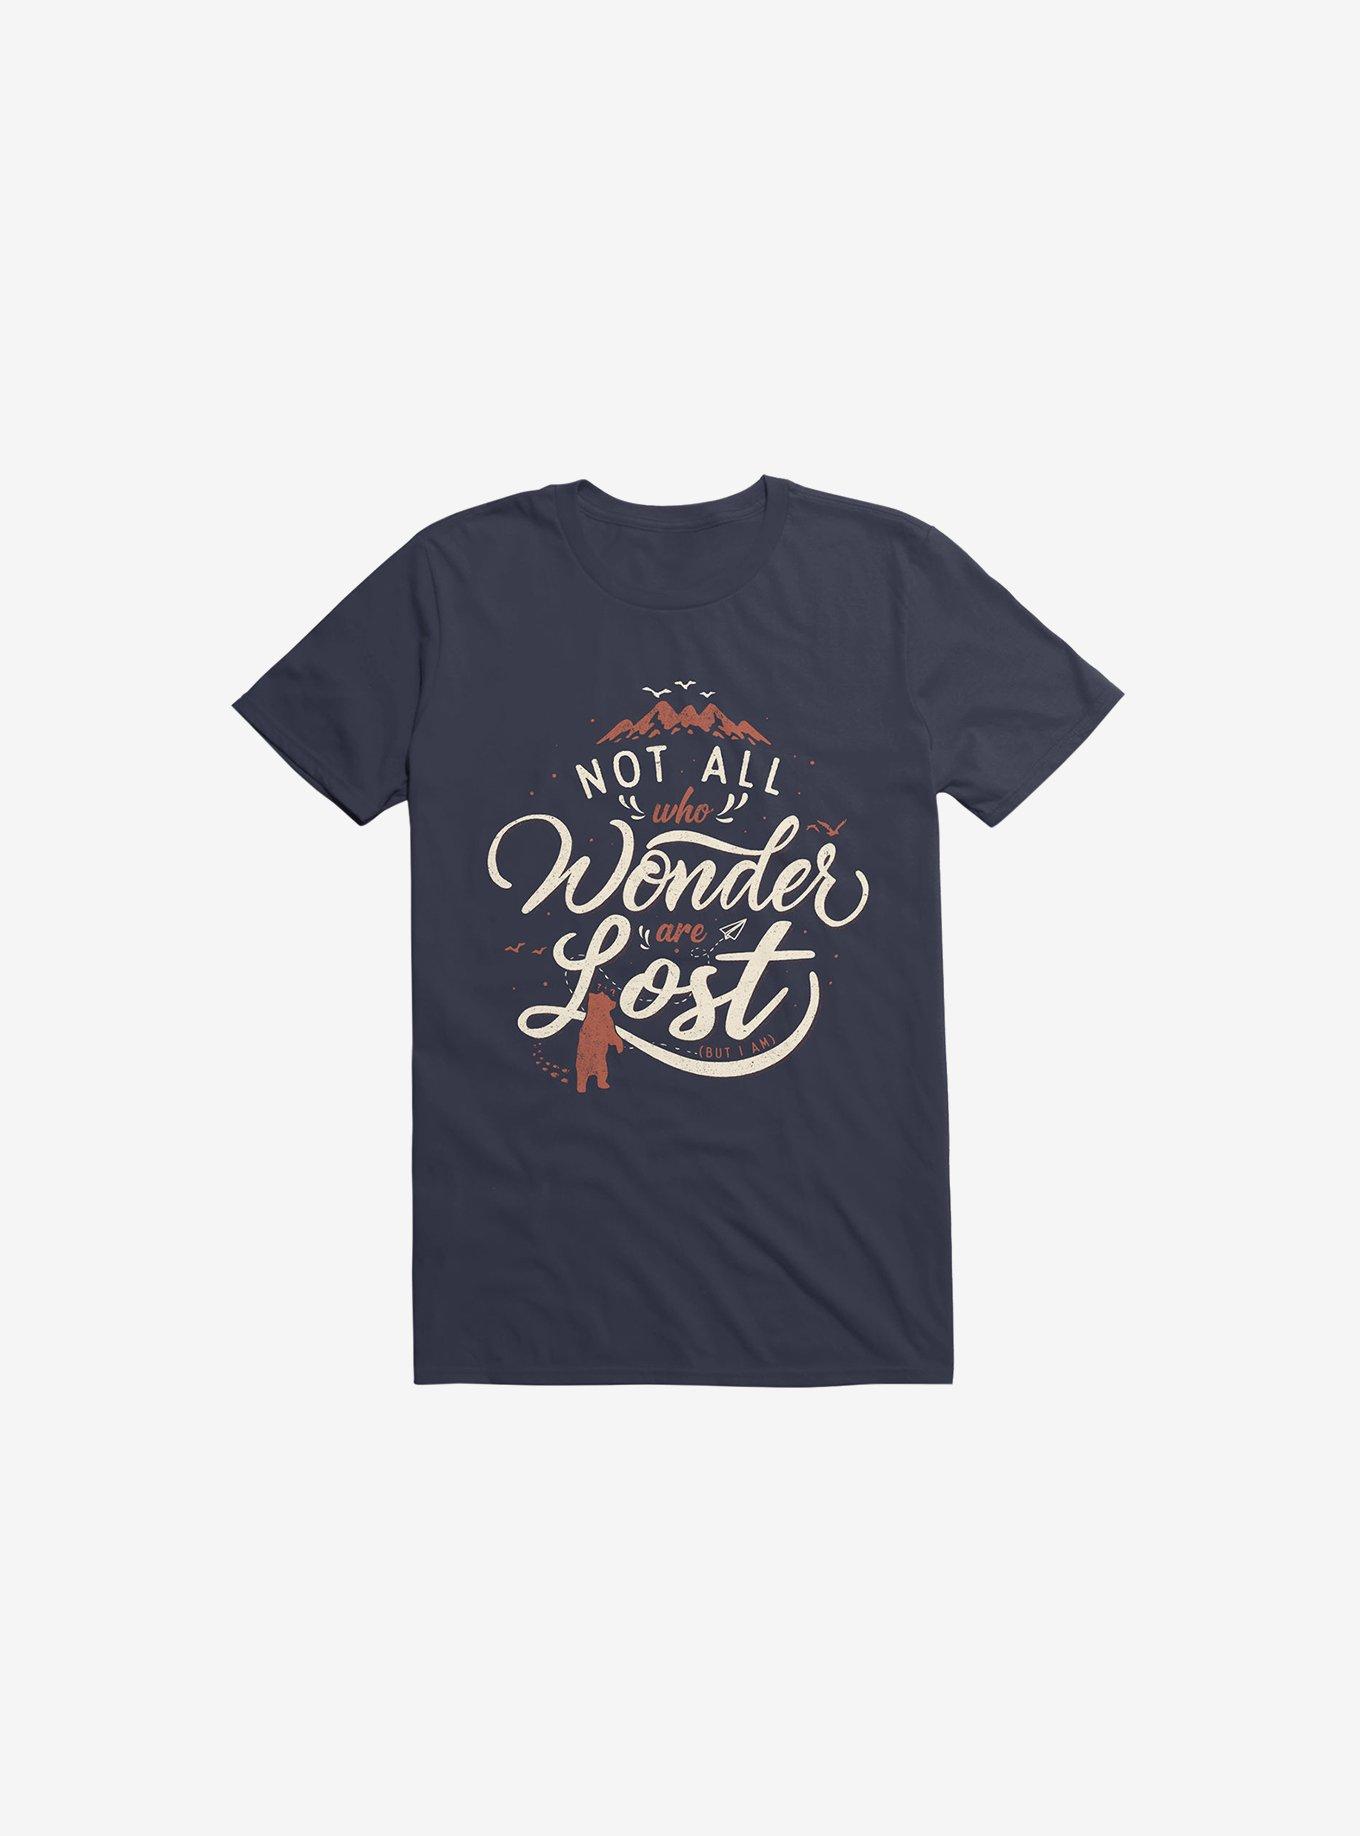 Not All Who Wander Are Lost Navy Blue T-Shirt